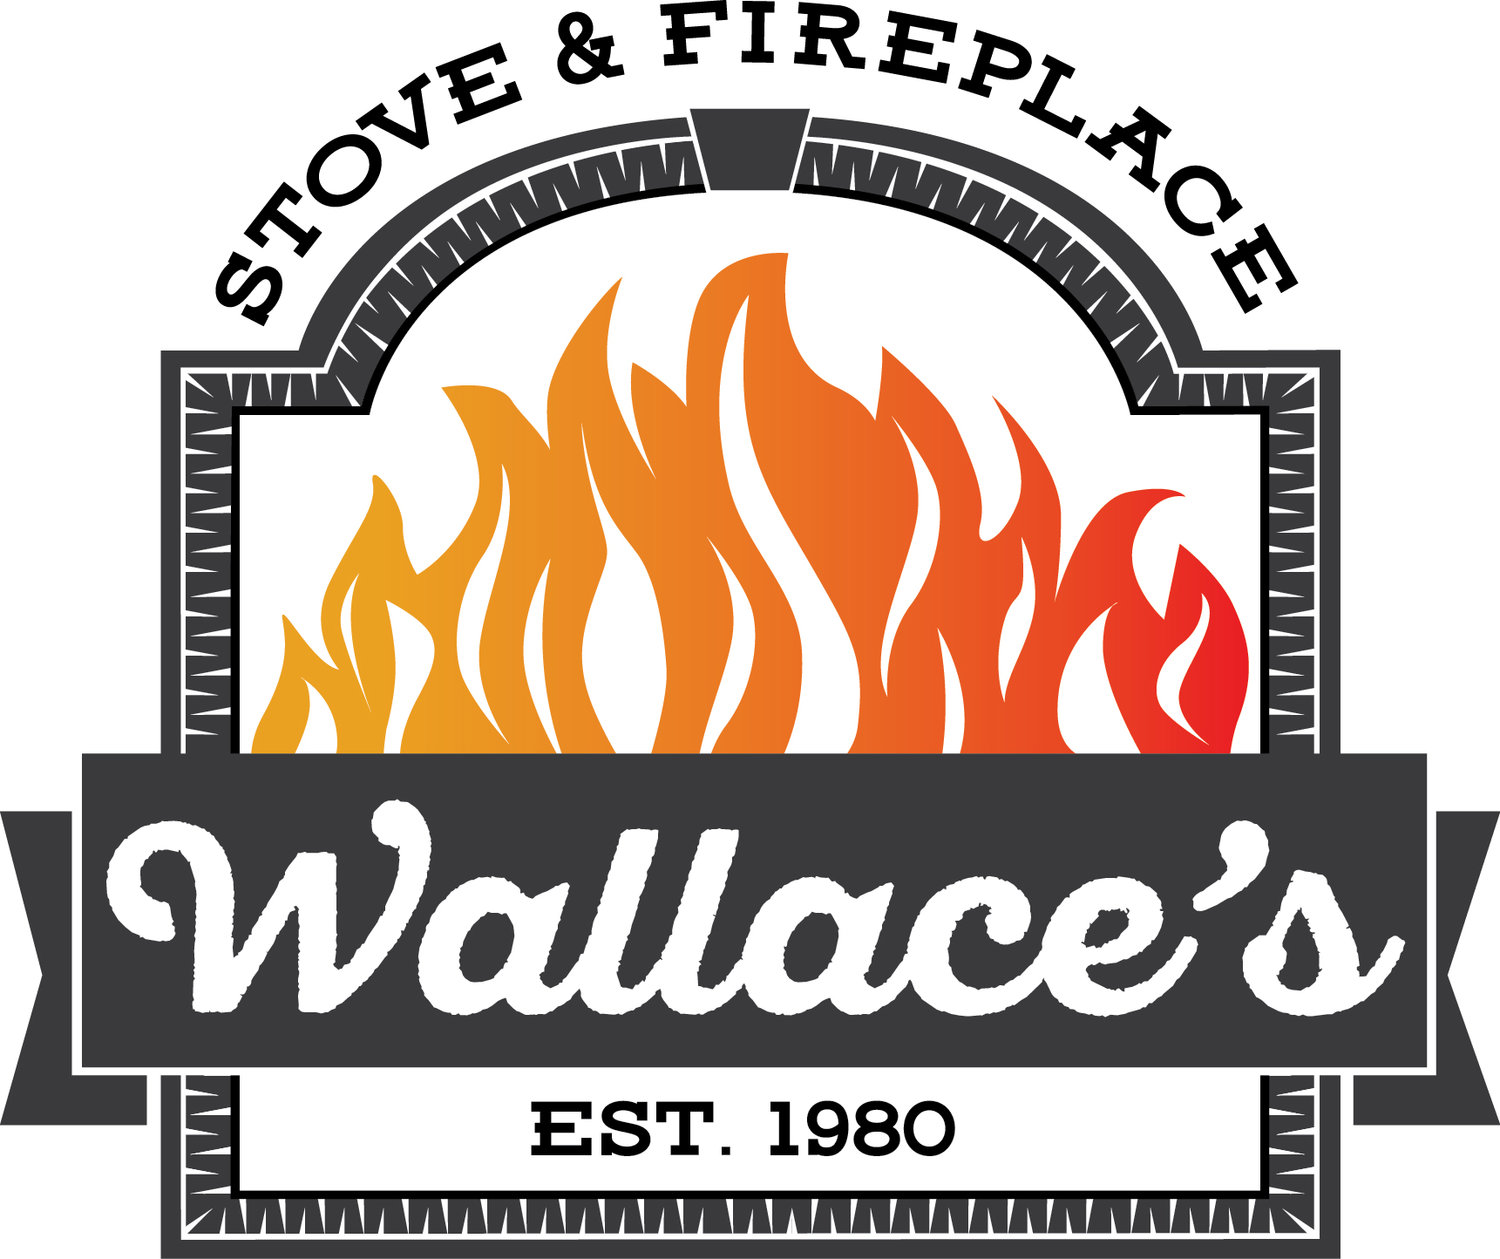 Wallace's Stove & Fireplace